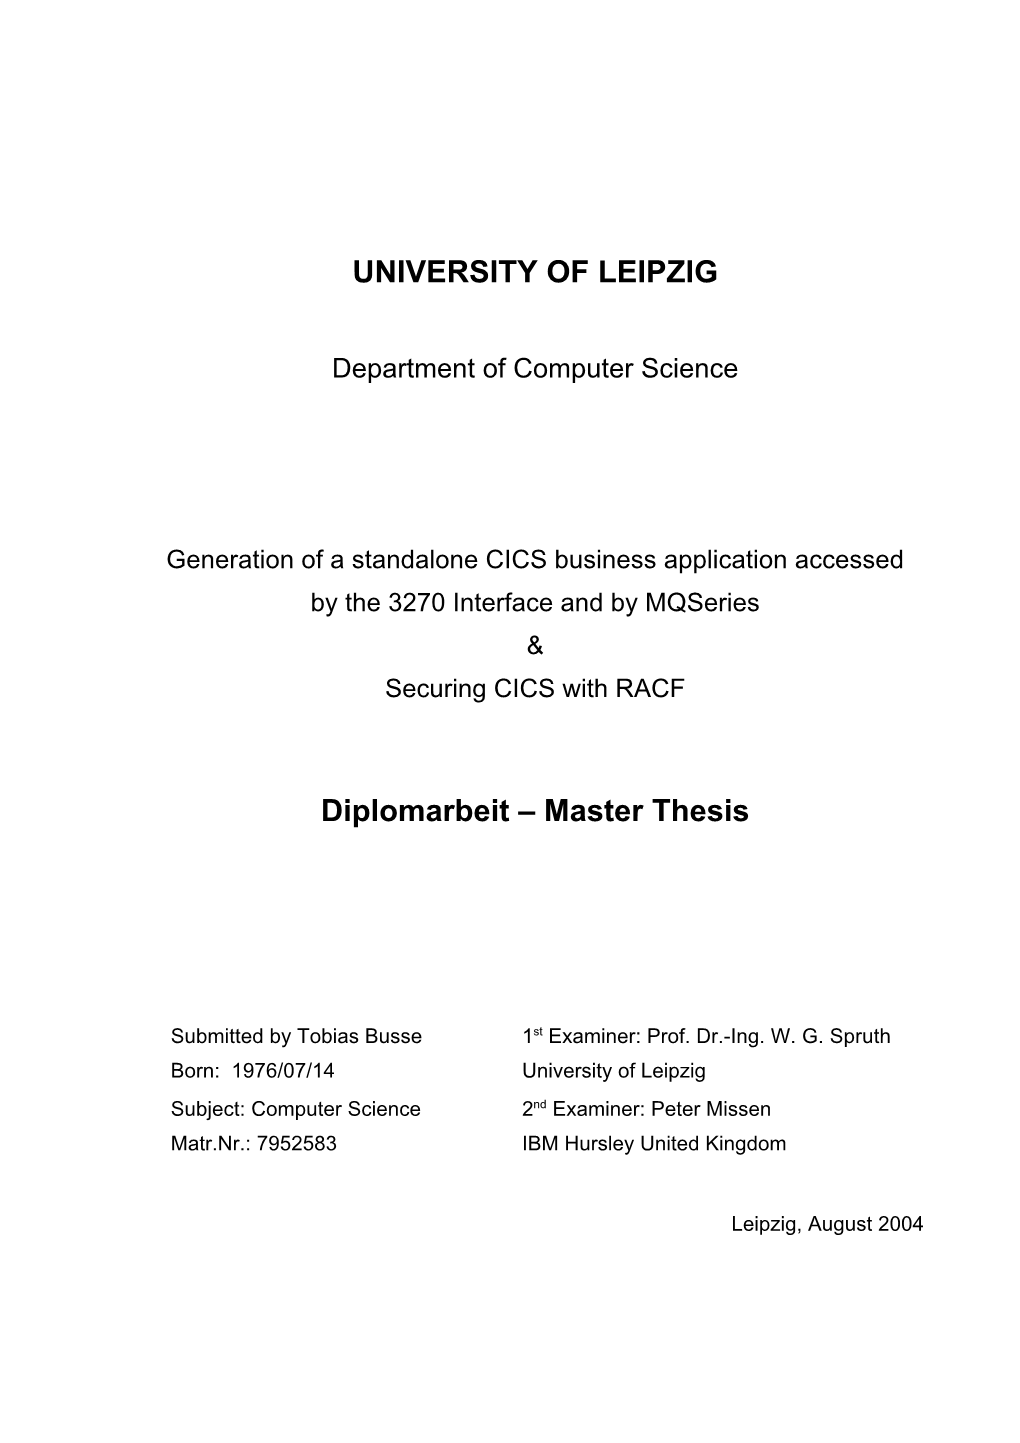 Completed 25.08.2004 Generation of a Standalone CICS Business